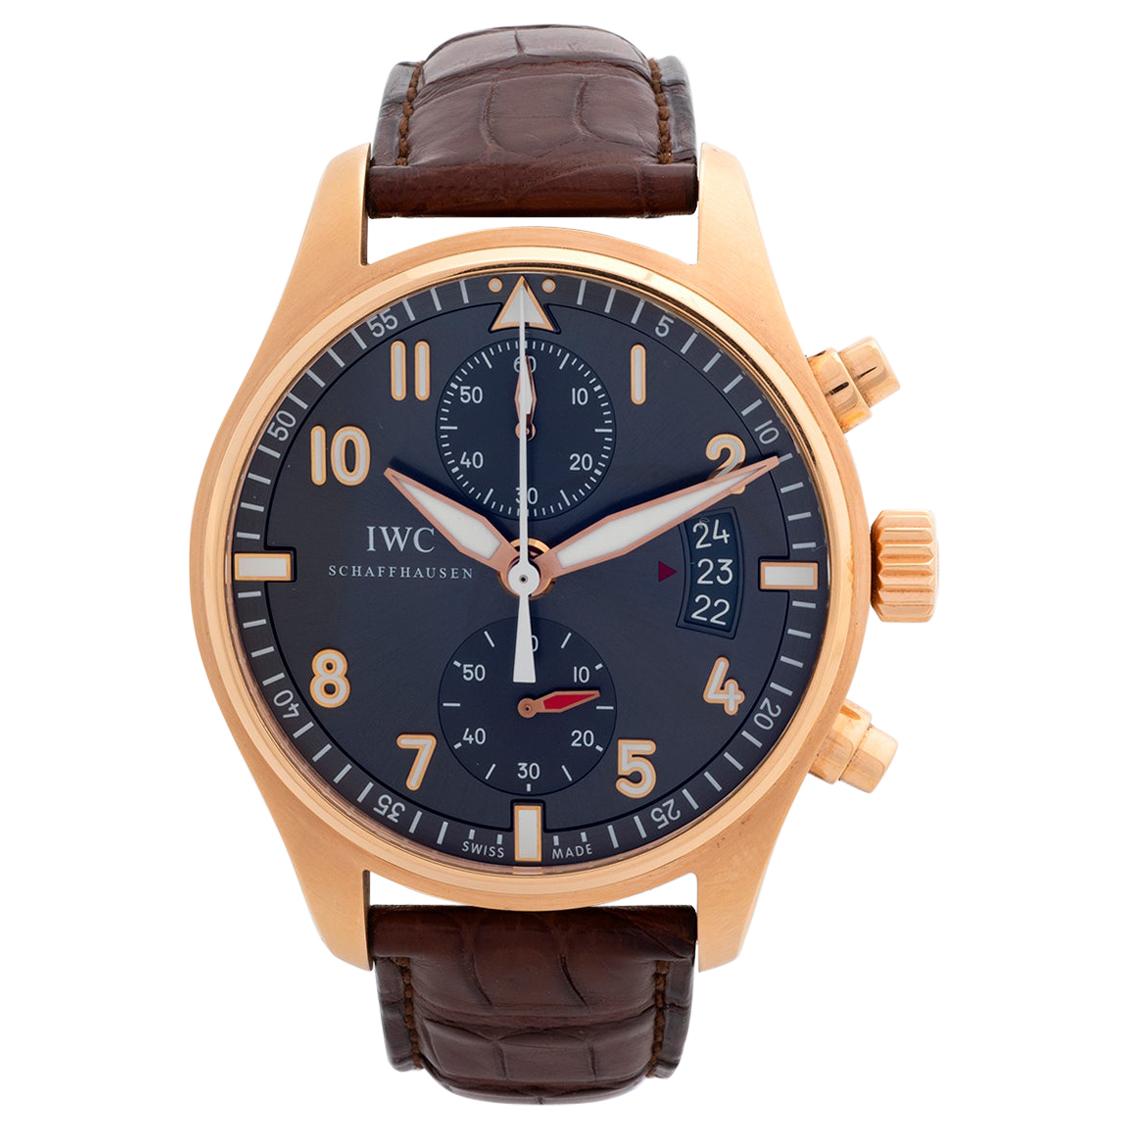 IWC 'Pilot' Spitfire Chronograph, 18k Rose Gold, Complete Set, Outstanding